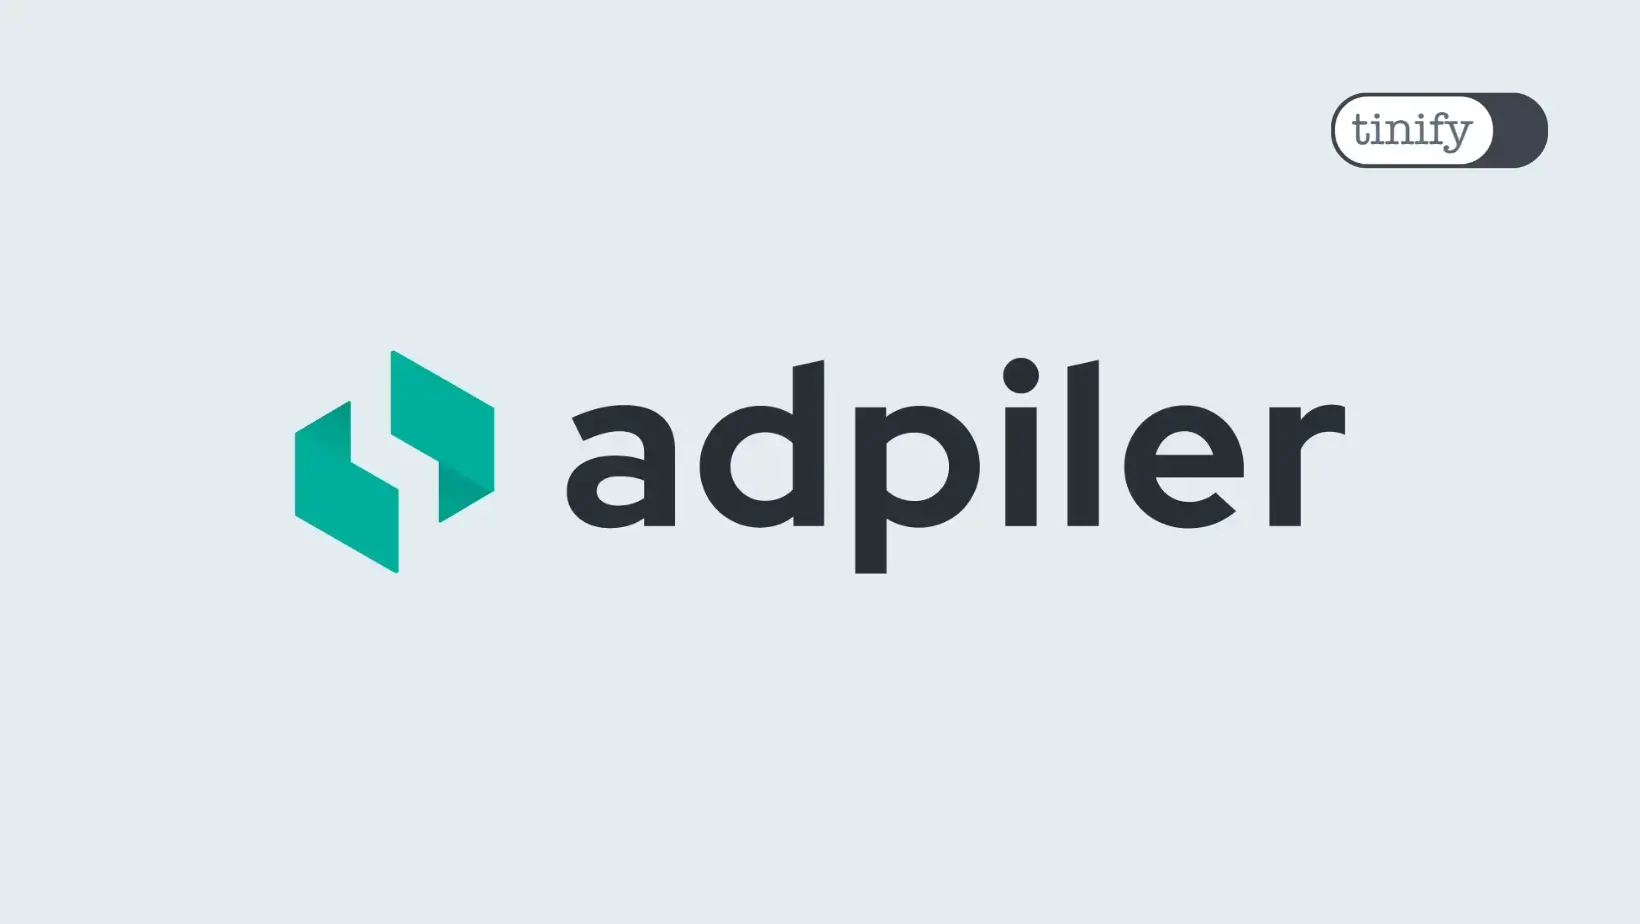 Customer story: Tinify’s API helps Adpiler simplify ad approvals for creative agencies